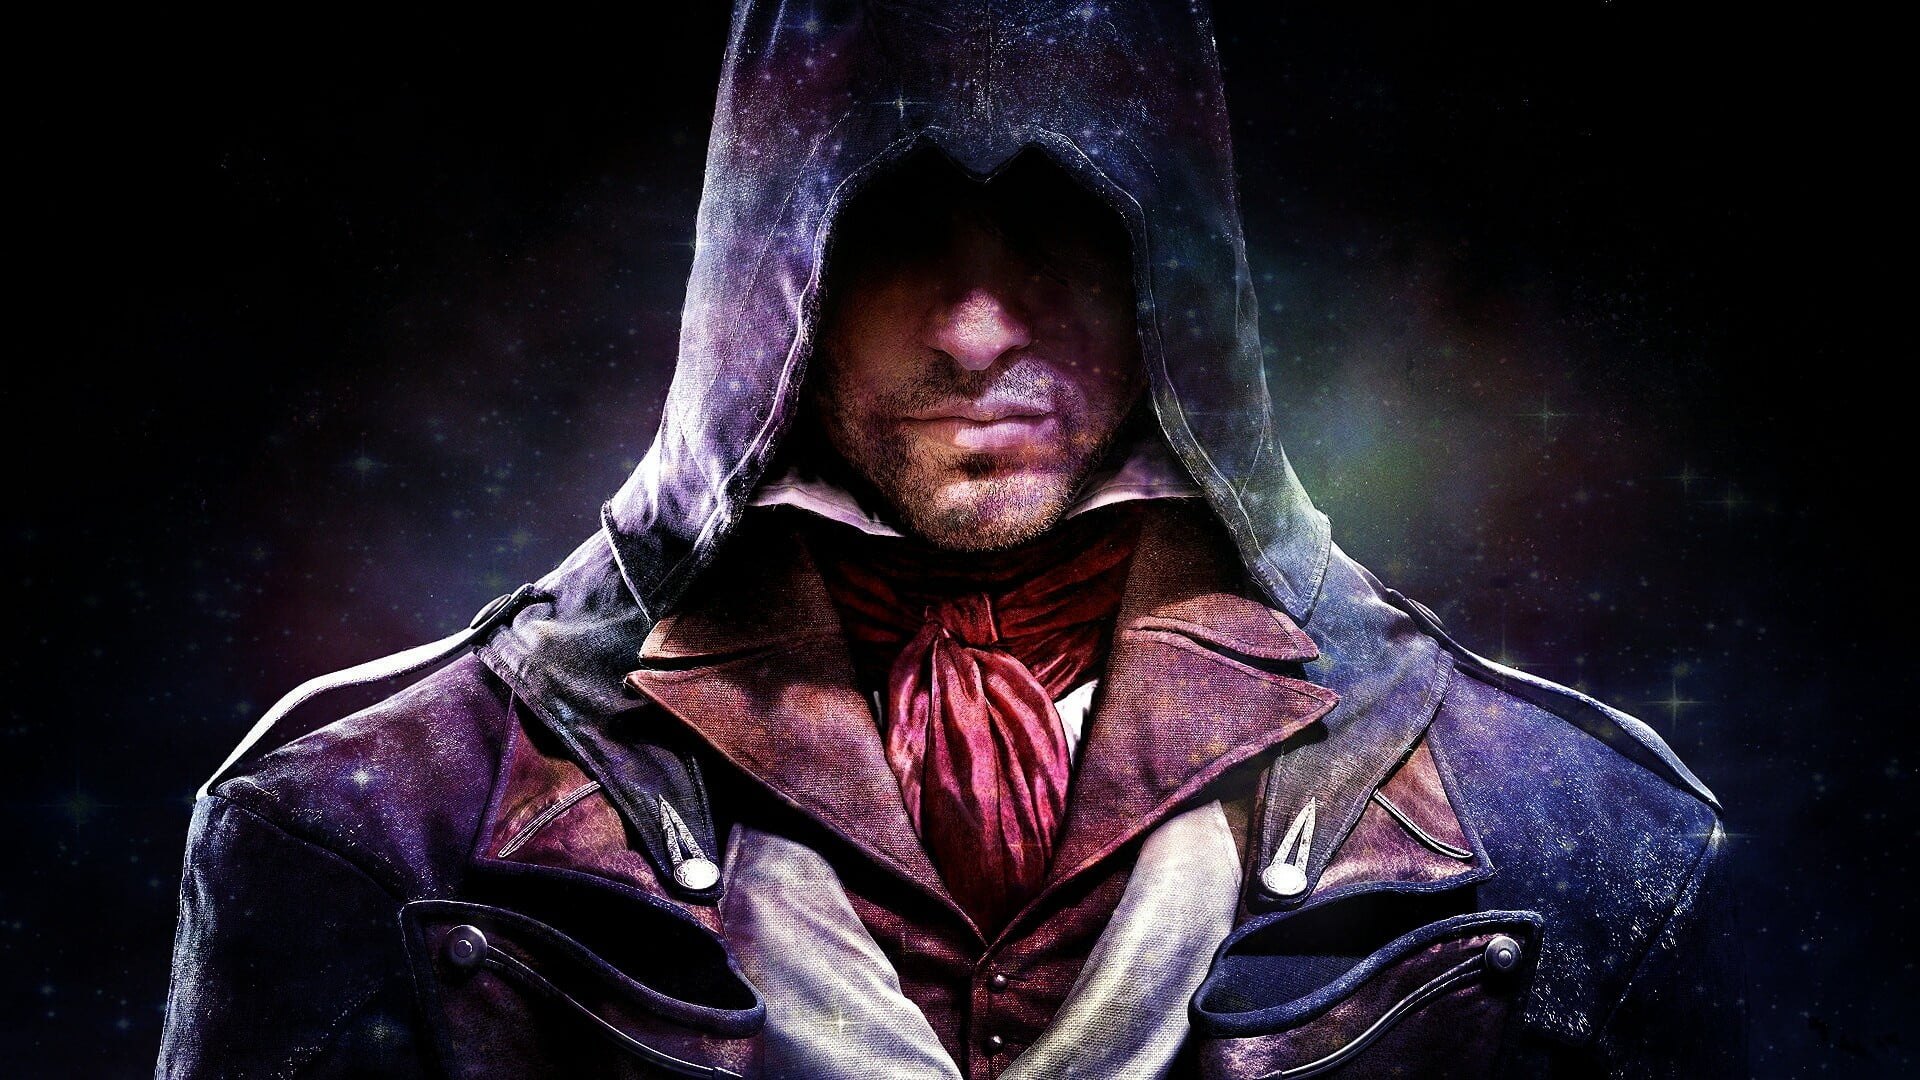 Assassin's Creed wallpaper, edit, portrait, one person, front view